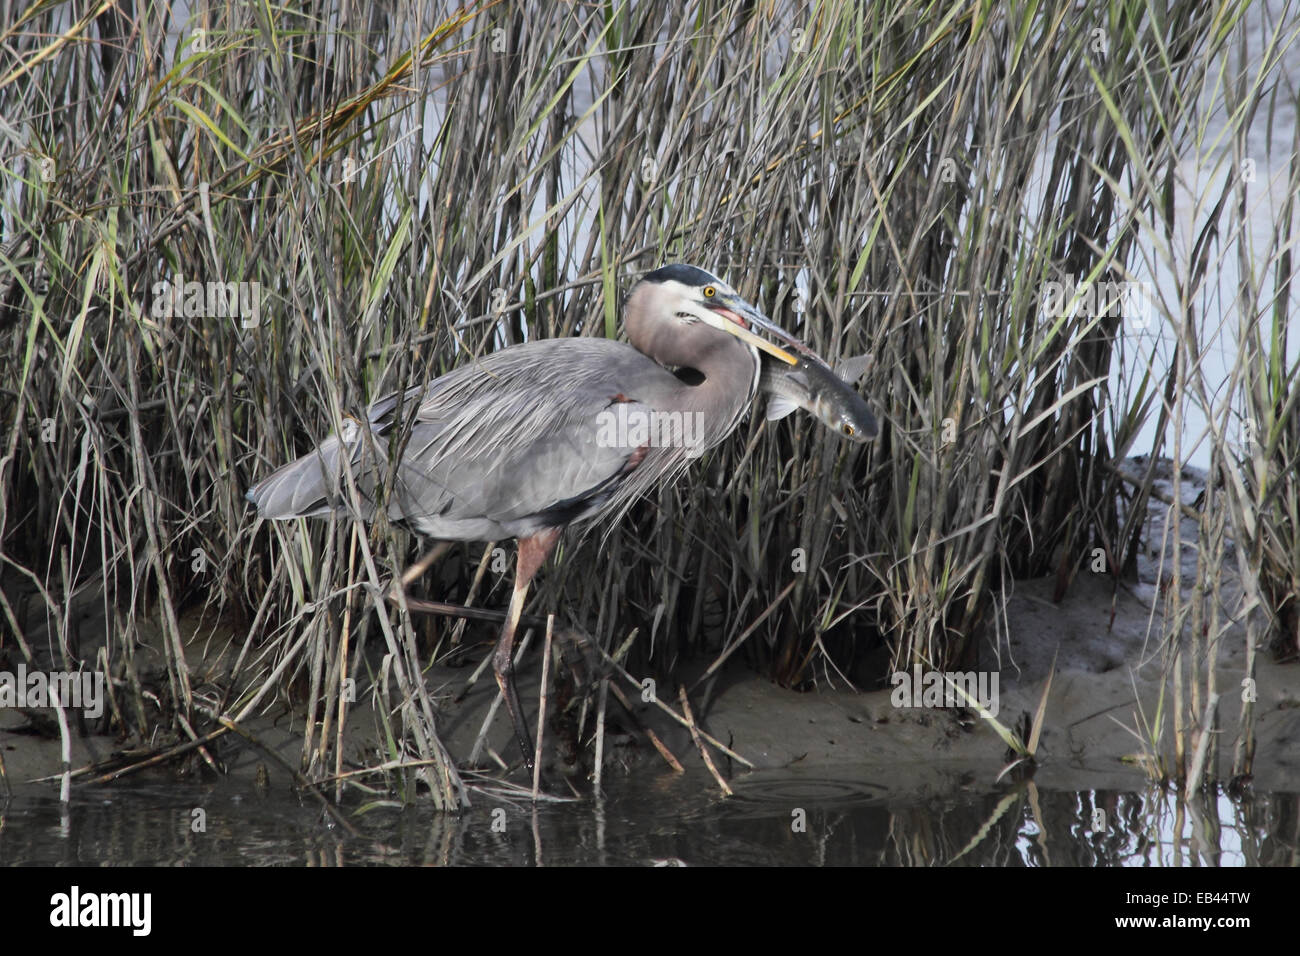 A Great blue heron stands among the spartina grass after catching a large fish in a coastal wetland. Stock Photo